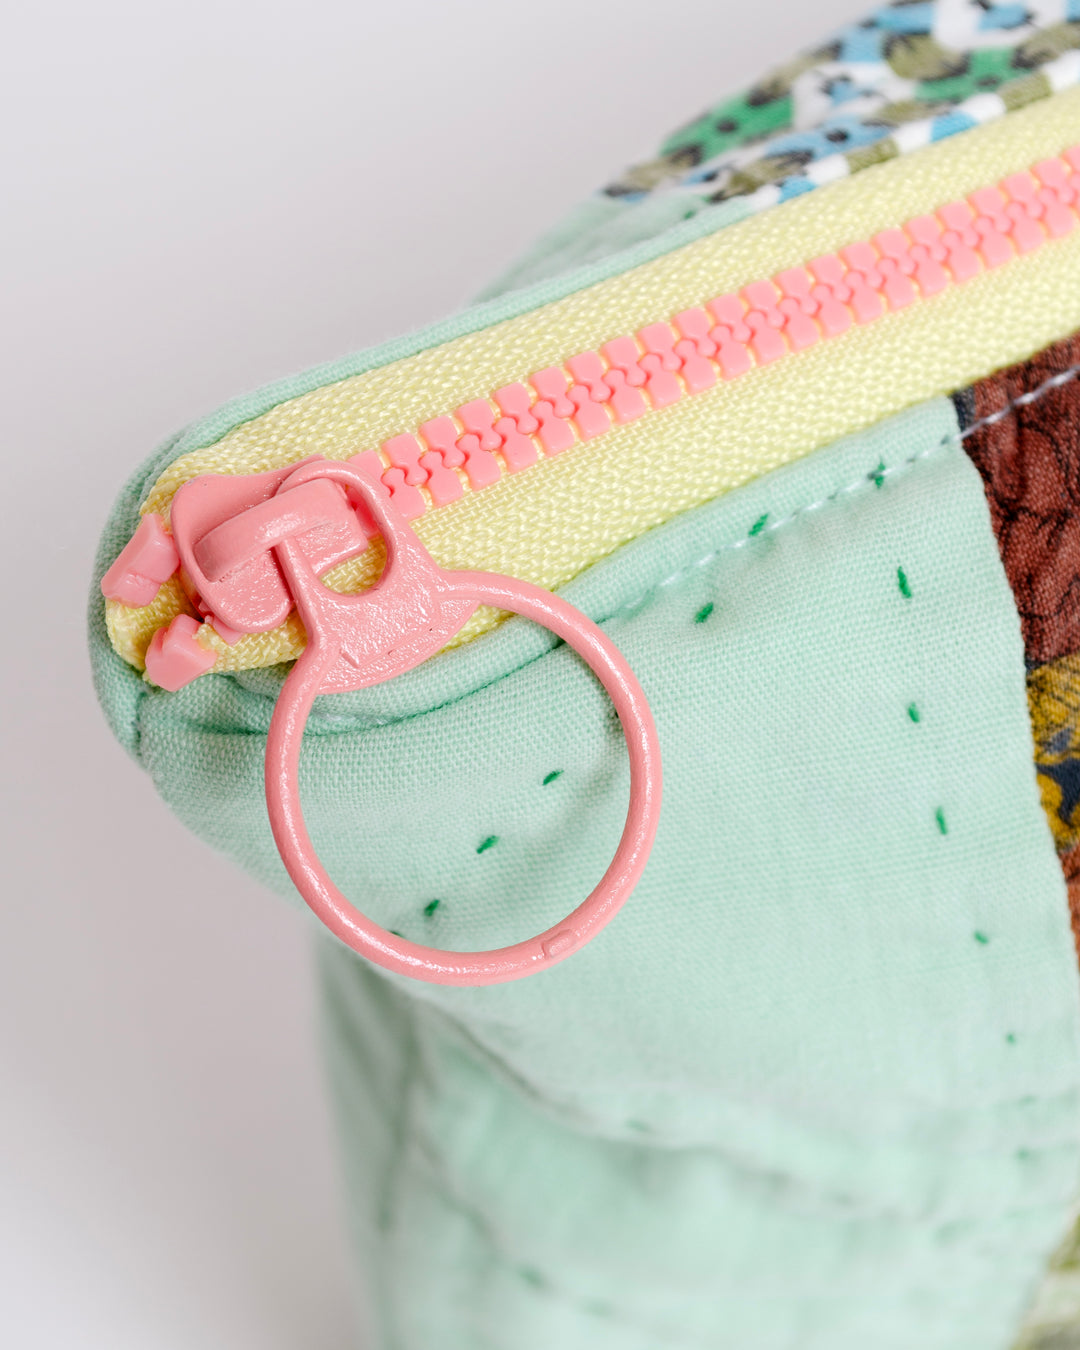 Upcycle Your Scraps - Zipper Pouch (Mailed in Materials)